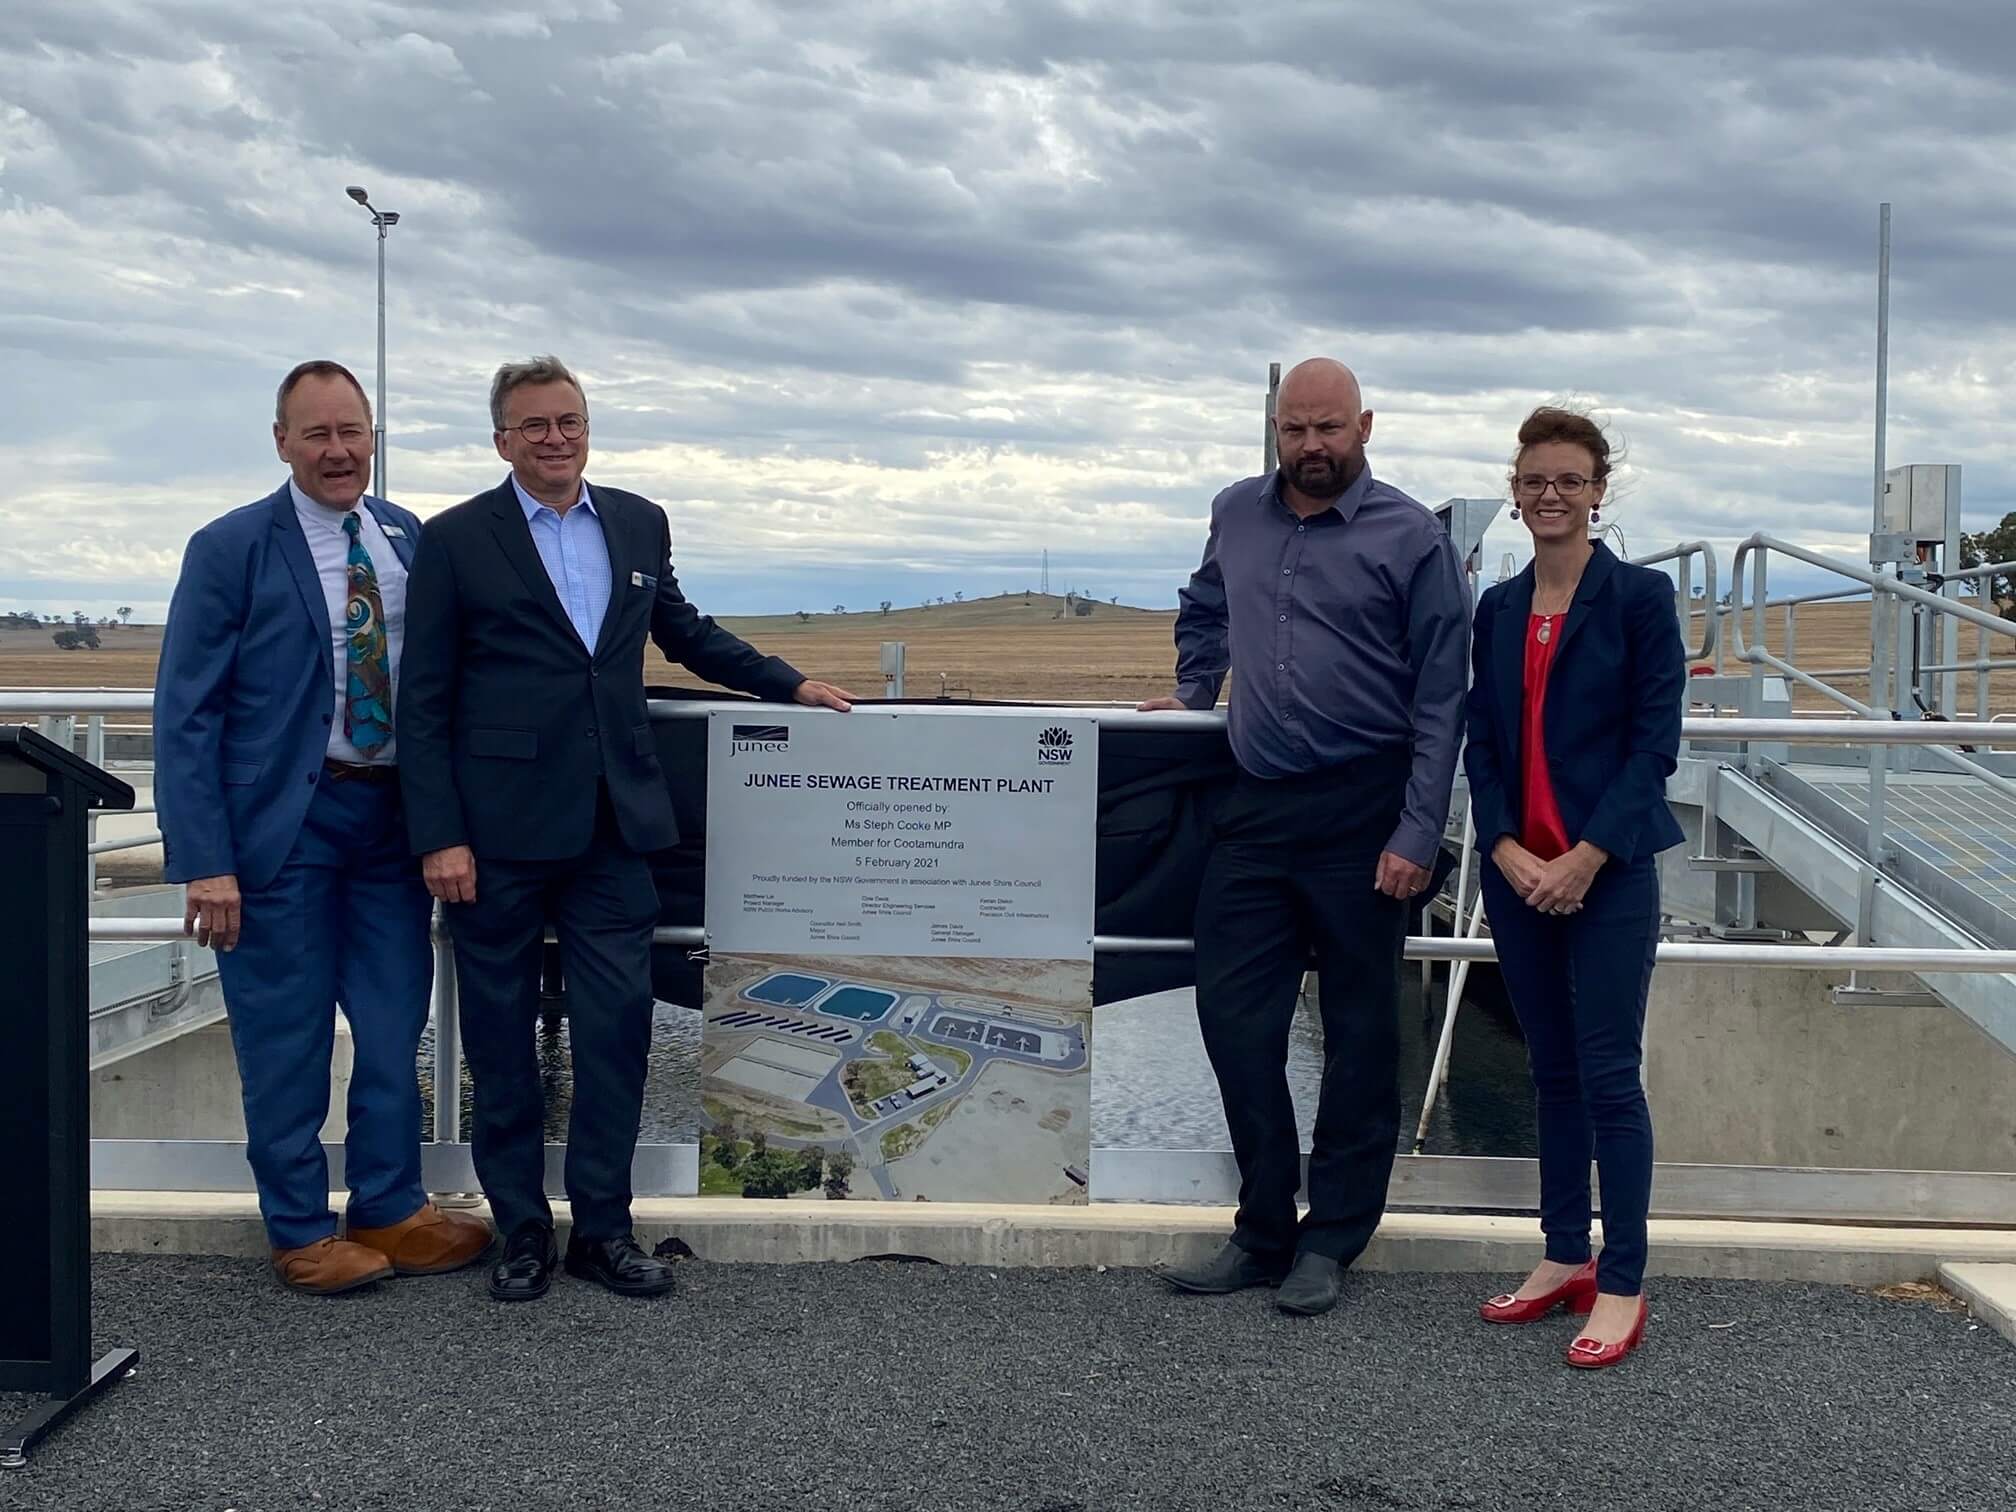 Cr Neil Smith, James Davis, Cole Davis and Steph Cooke MP stand next to a sign that reads 'Junee Sewerage Treatment Plant' and lean against a railing. Behind them is a pool of sewerage water.